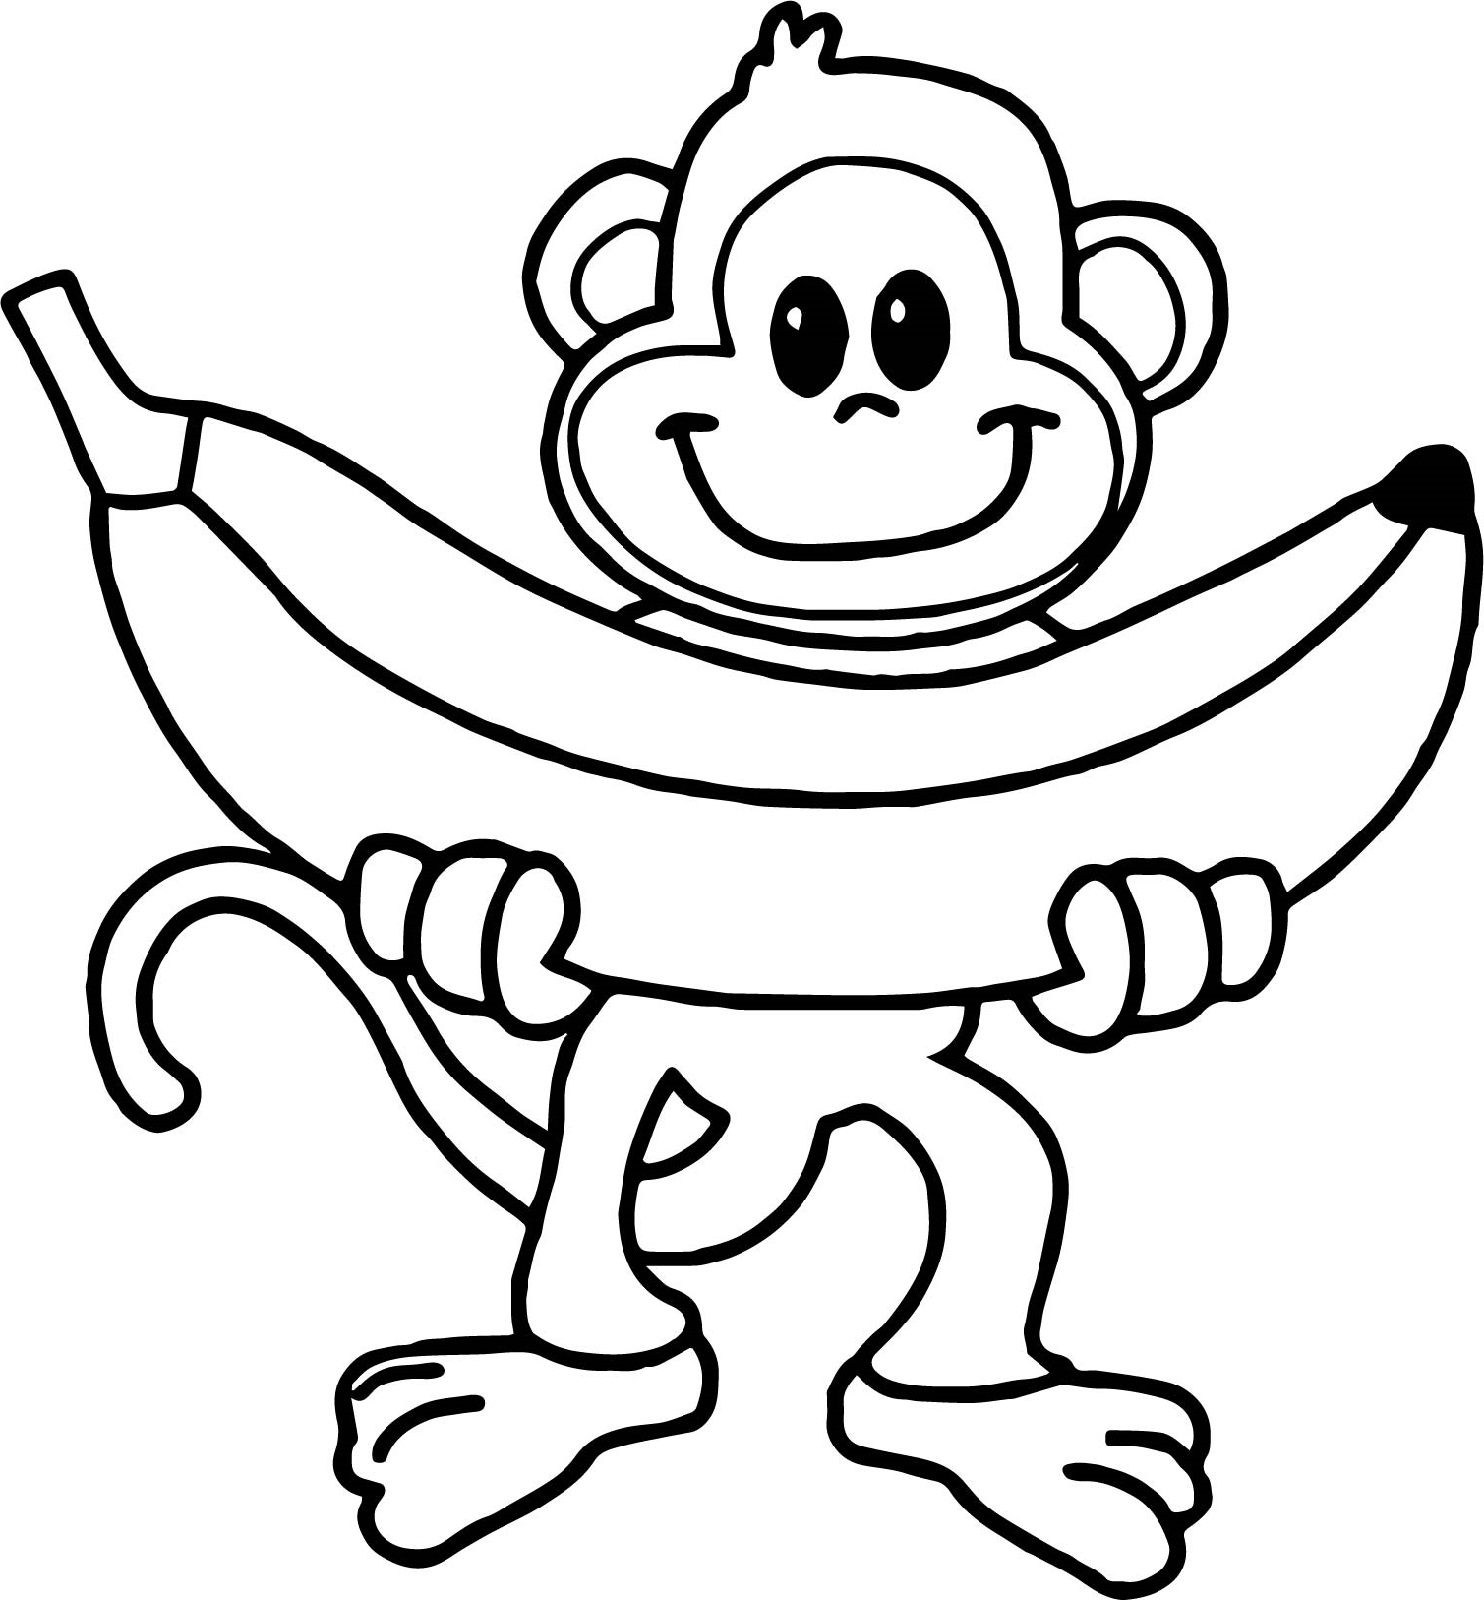 pictures of monkeys to color images of monkeys in 2020 with images monkey coloring pictures monkeys to of color